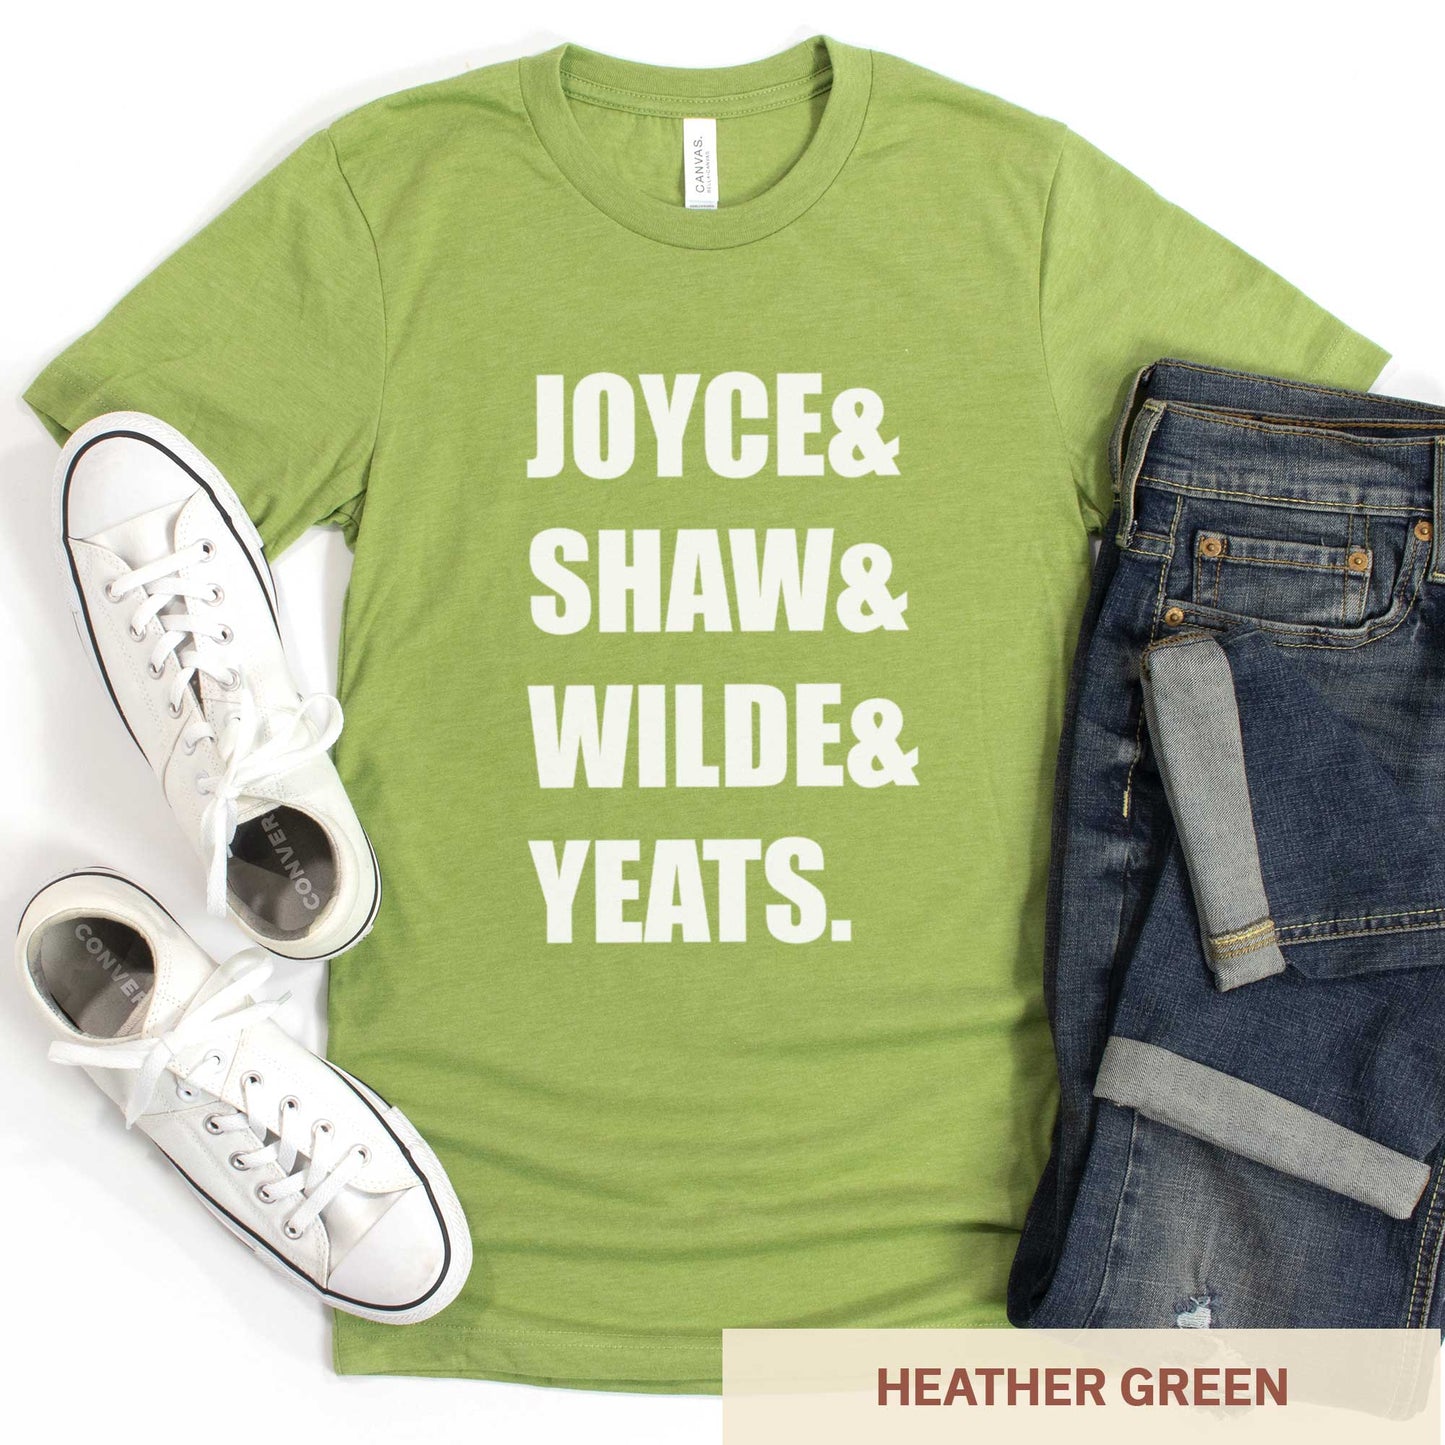 A heather green Bella Canvas t-shirt featuring the last names of Irish writers Joyce, Shaw, Wilde and Yeats.